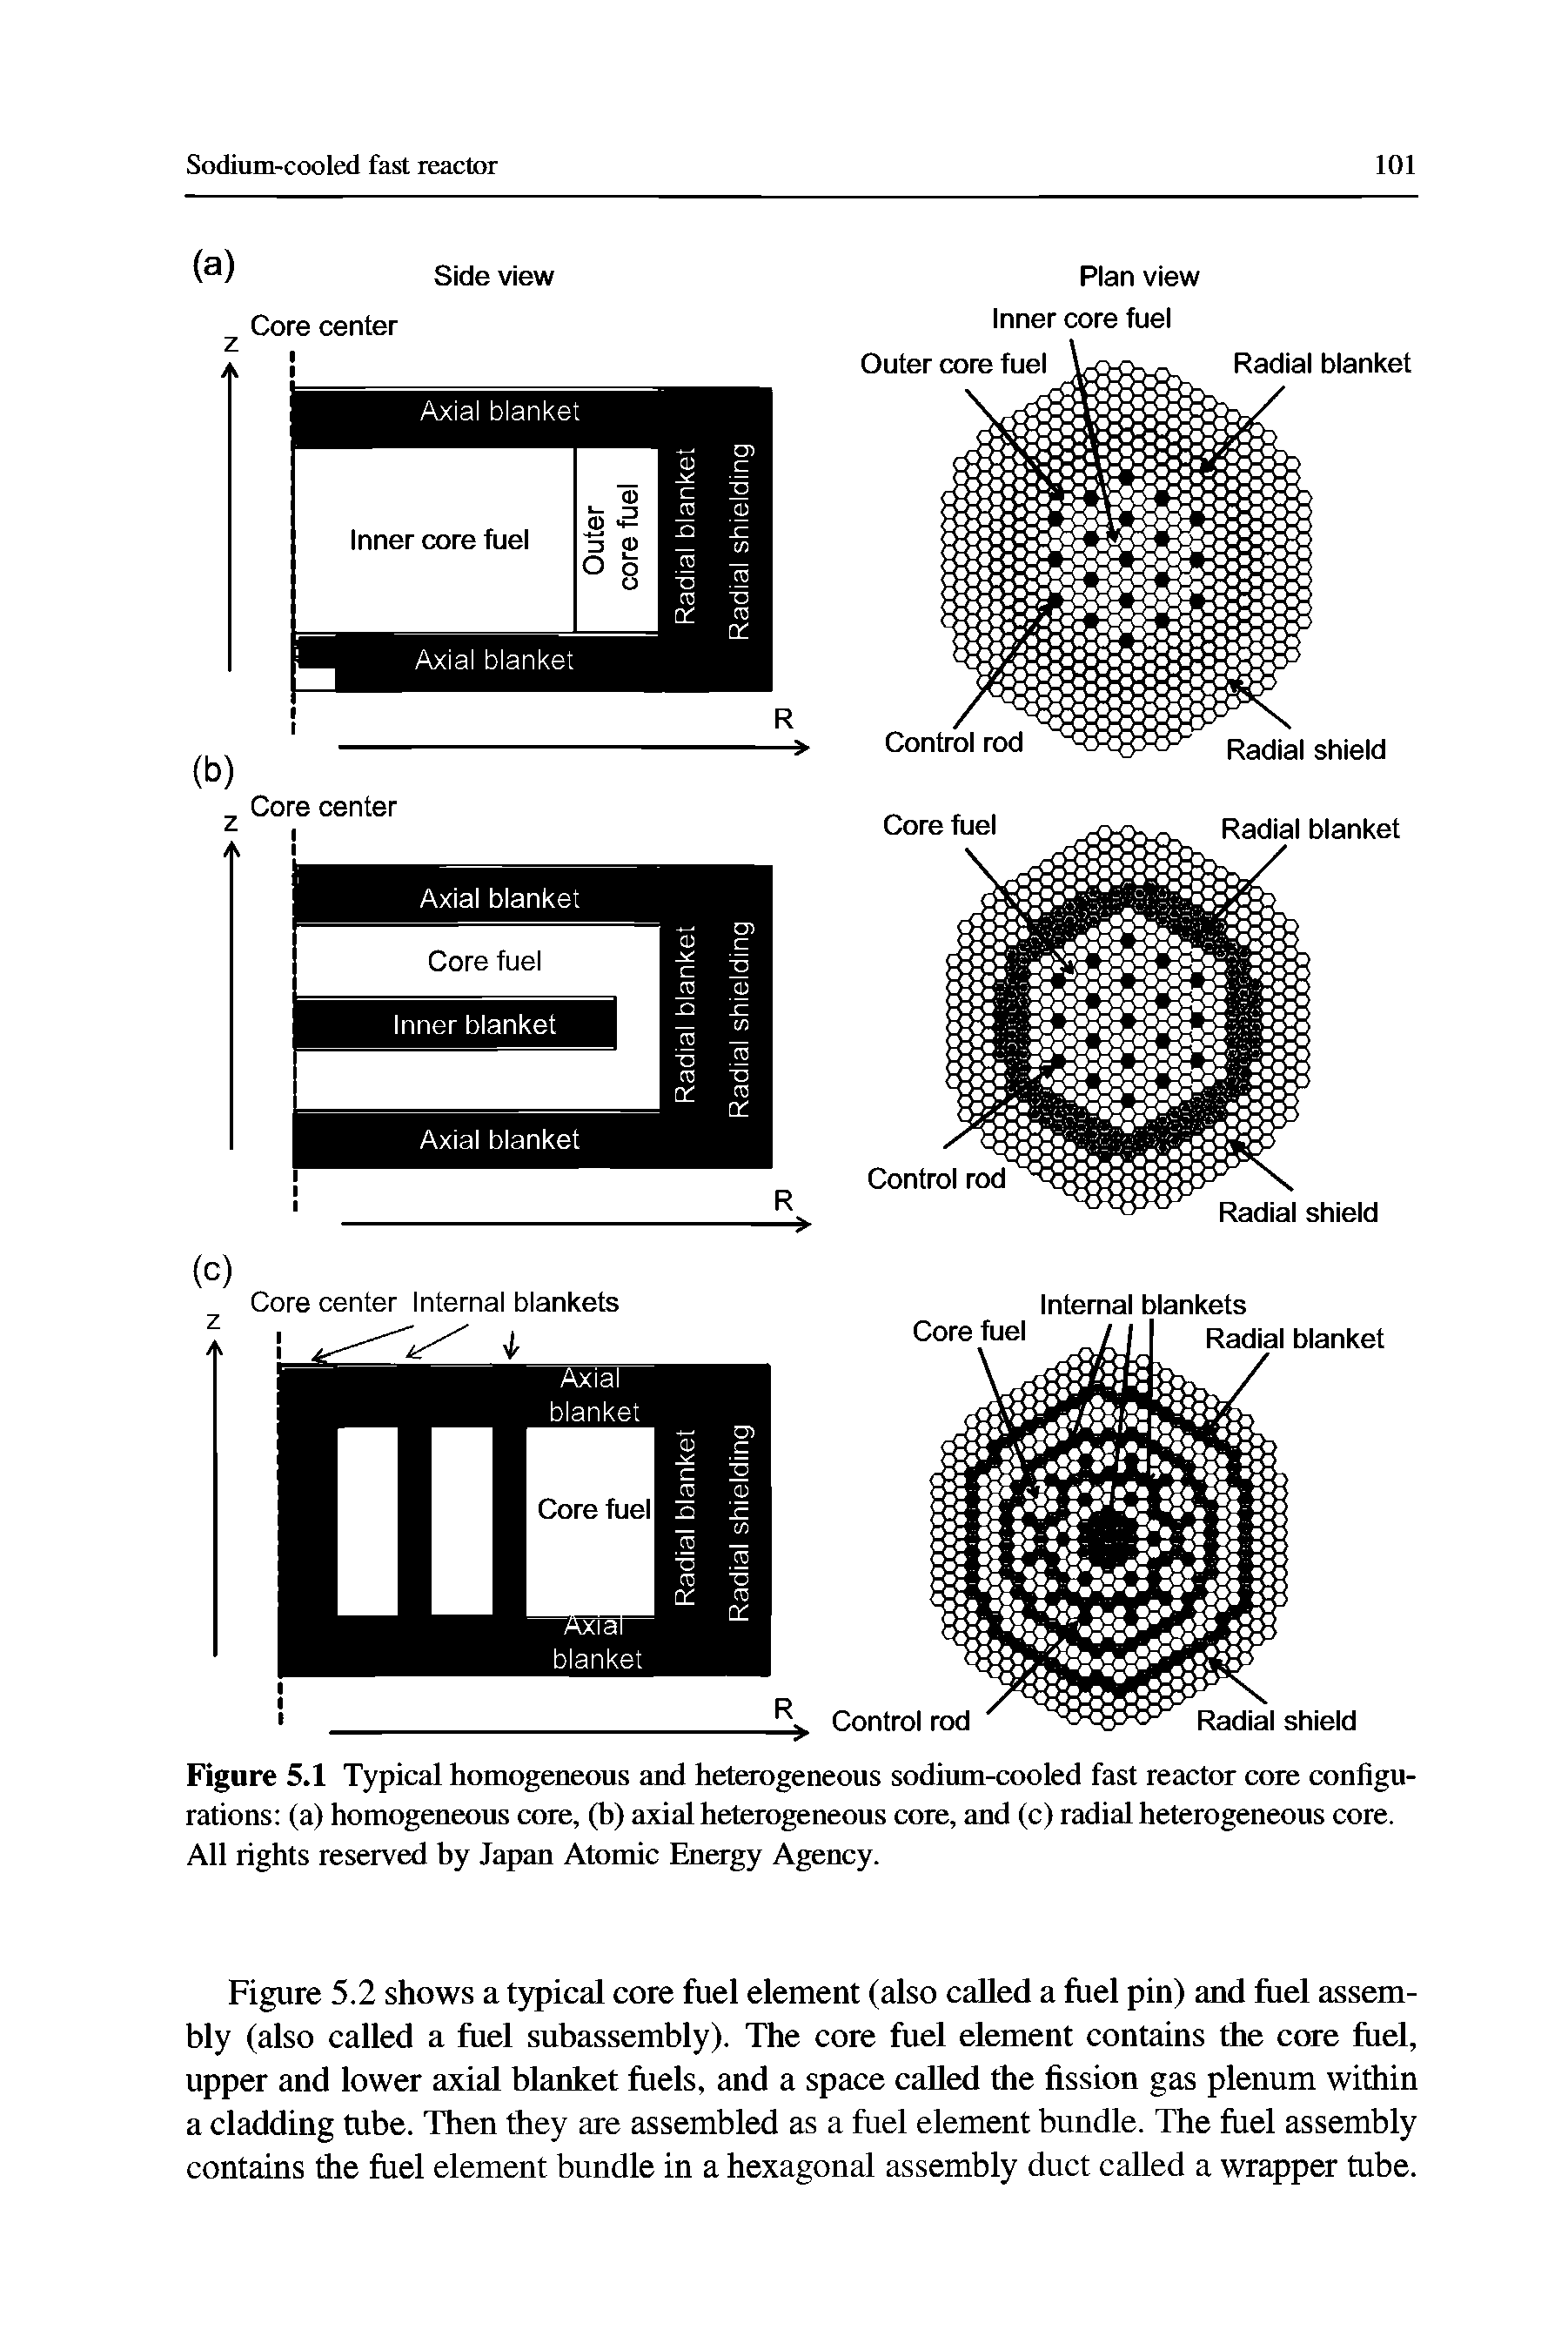 Figure 5.1 Typical homogeneous and heterogeneous sodium-cooled fast reactor core configurations (a) homogeneous core, (h) axial heterogeneous core, and (c) radial heterogeneous core. All rights reserved hy Japan Atomic Energy Agency.